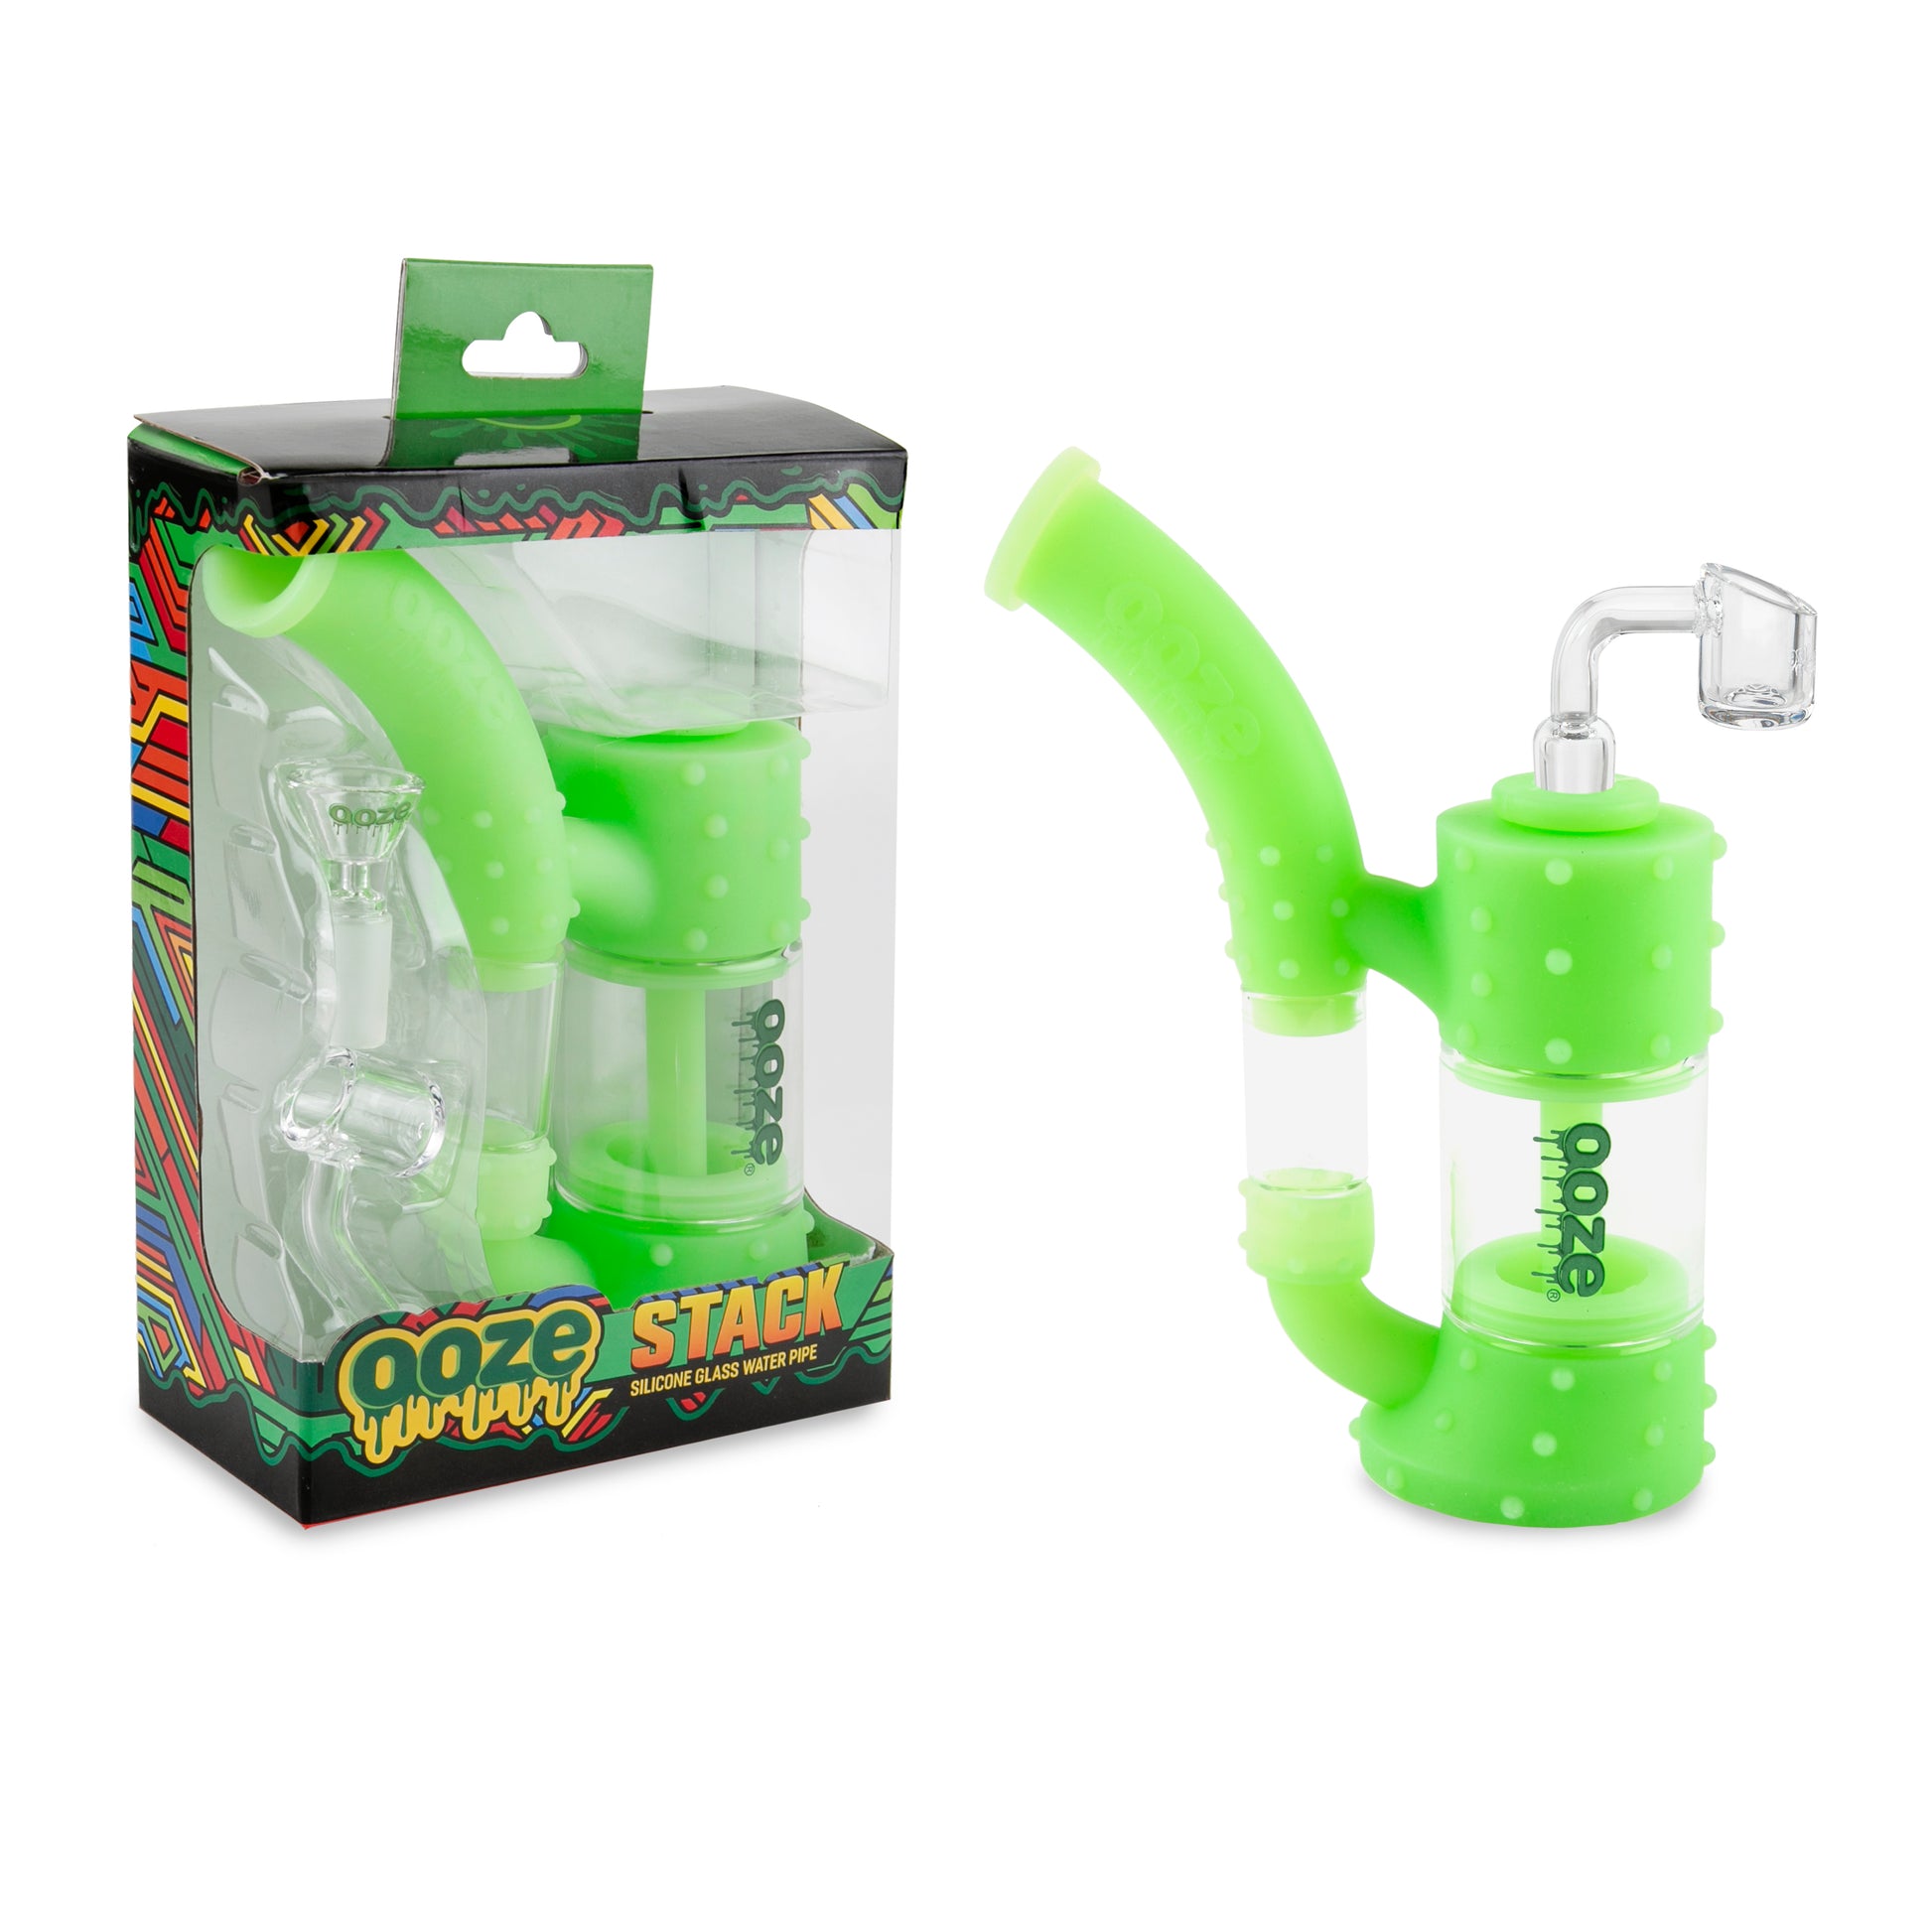 Stack Pipe Silicone Bubbler - Green Glow